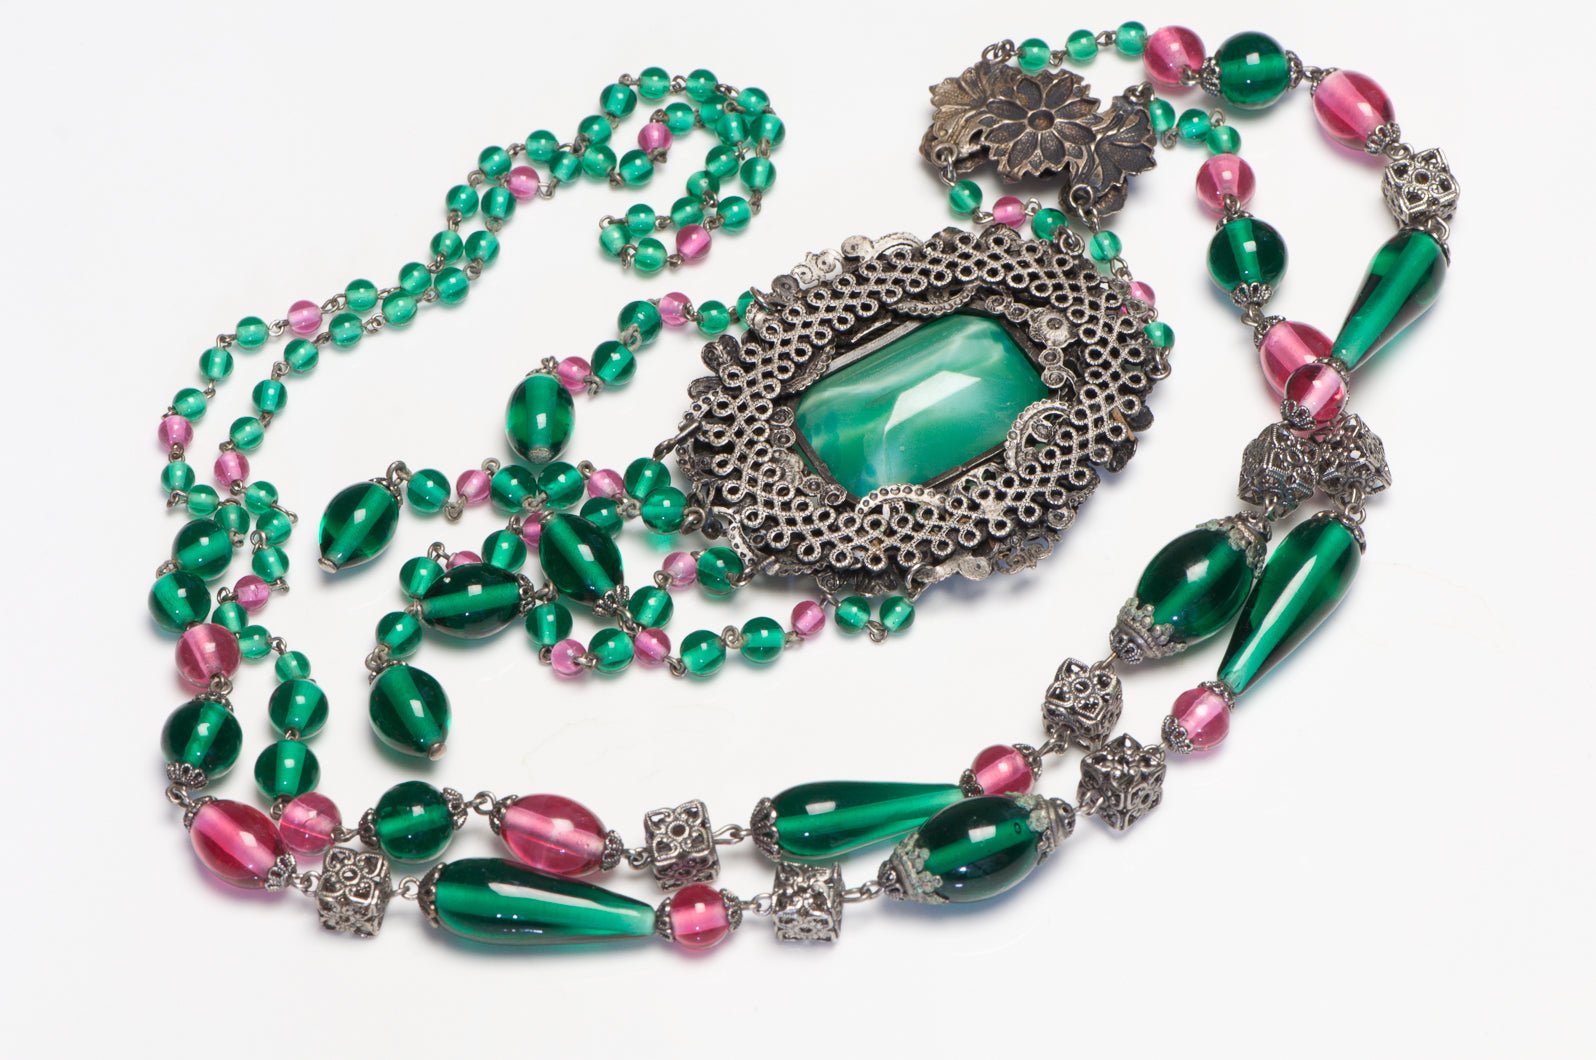 Vintage 1930's Czech Green Pink Glass Beads Crystal Flapper Necklace